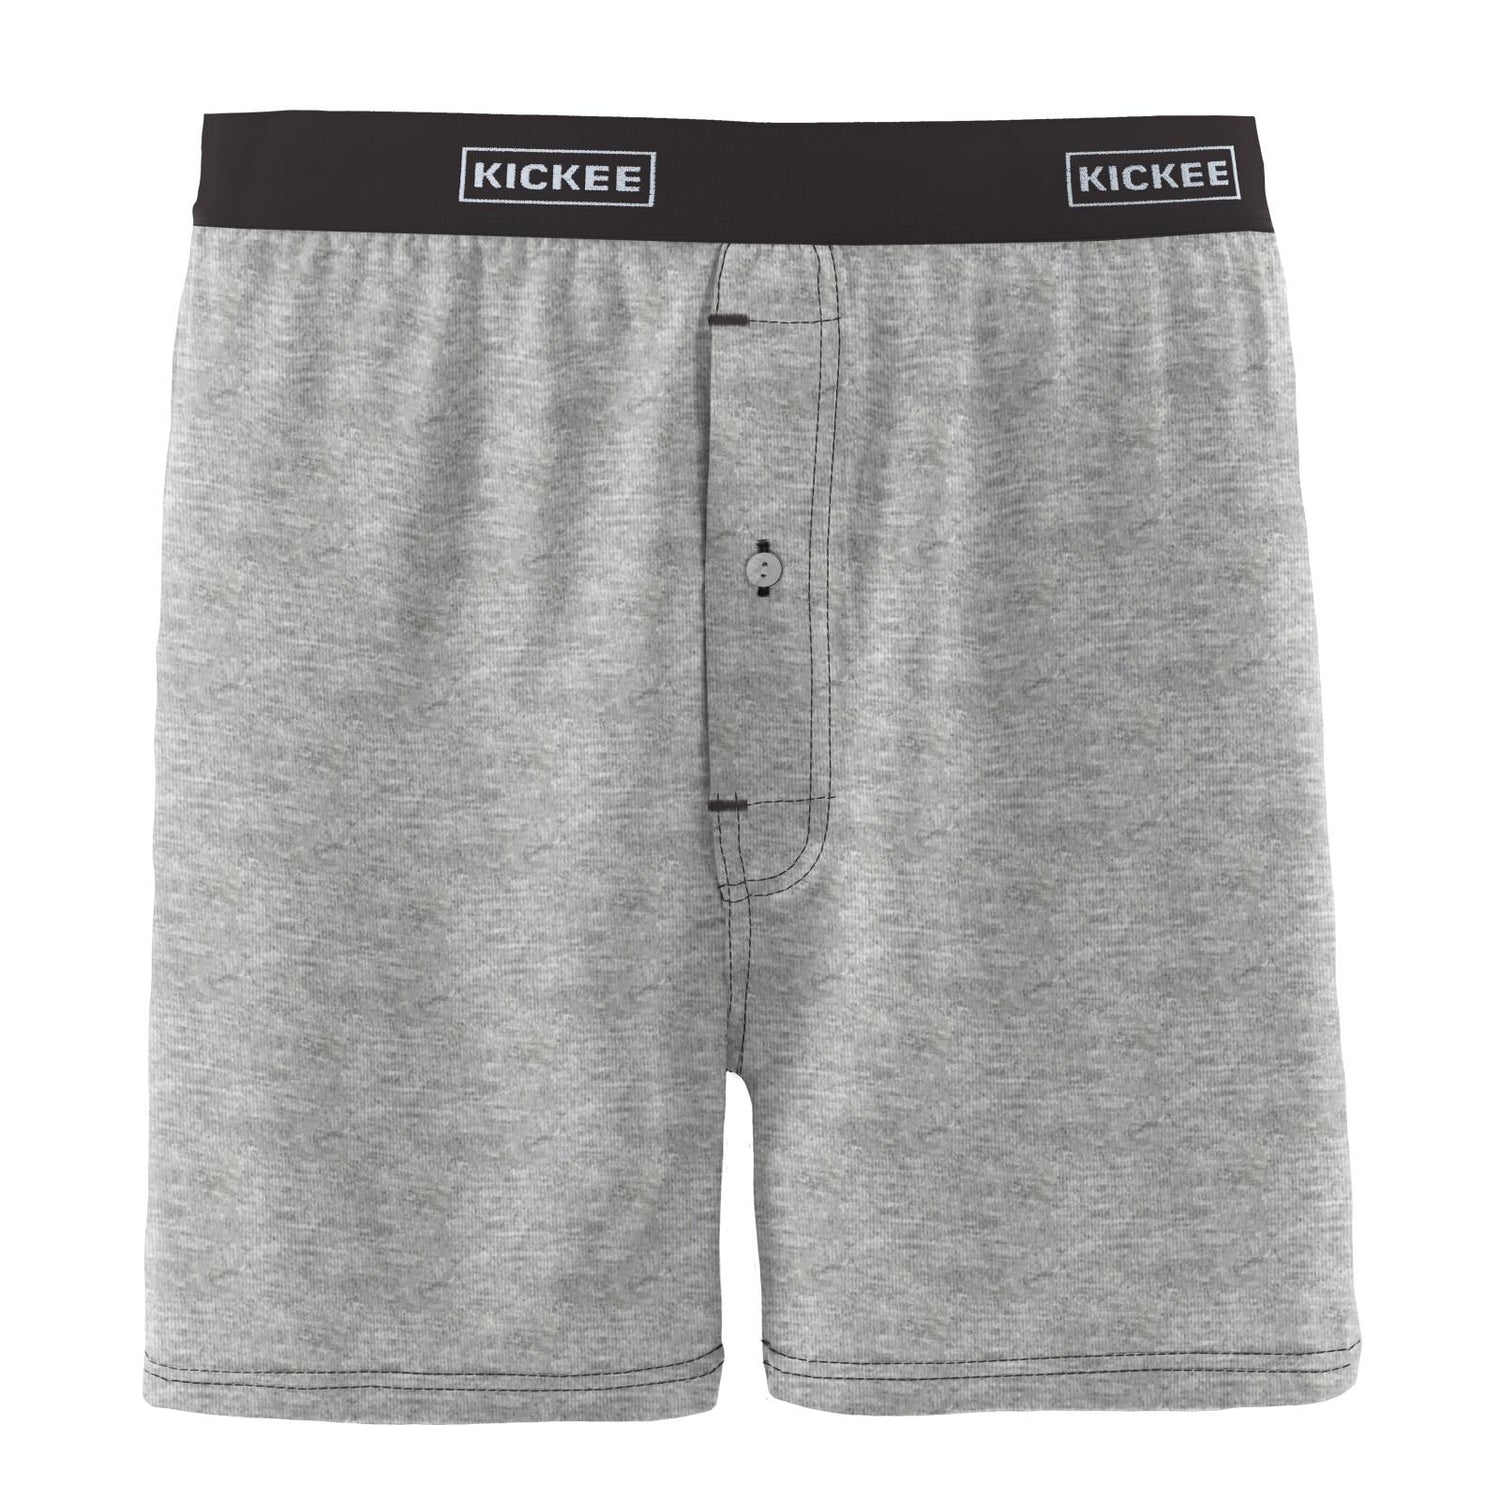 Men's Boxer Shorts in Heathered Mist with Midnight